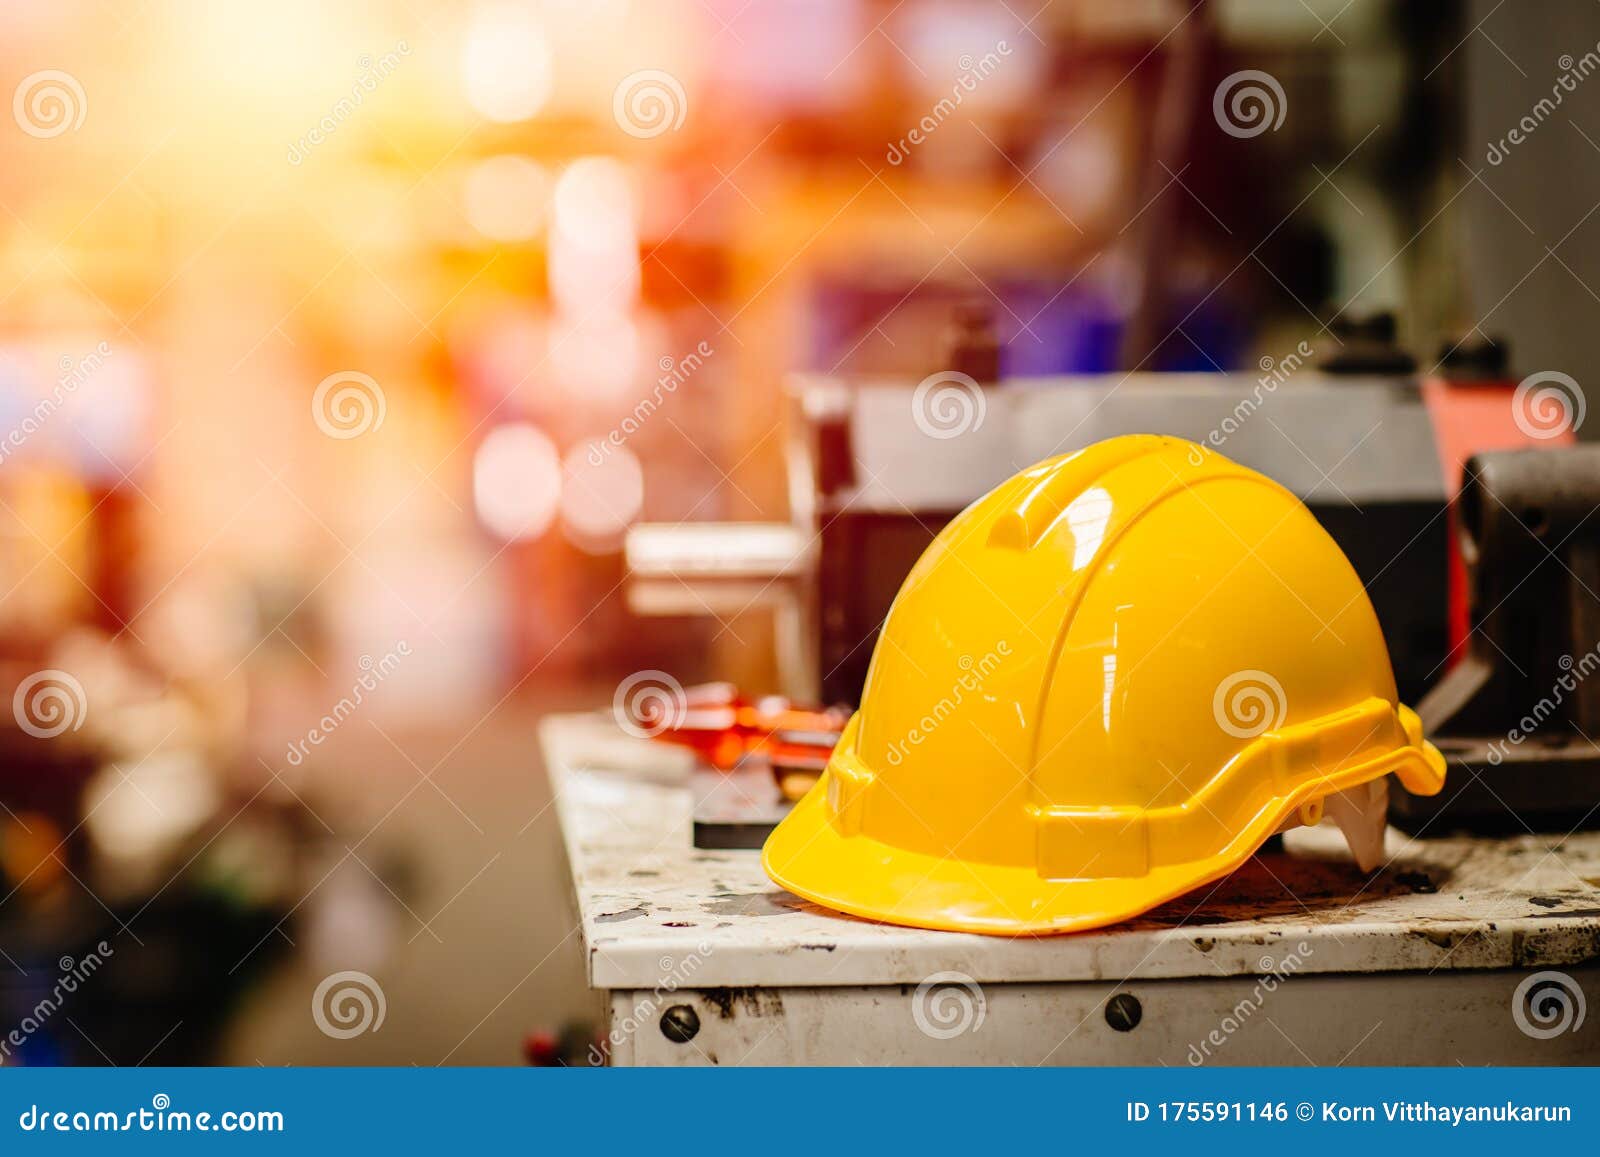 yellow helmet hardhat safety for factory worker working in danger workplace with space for text